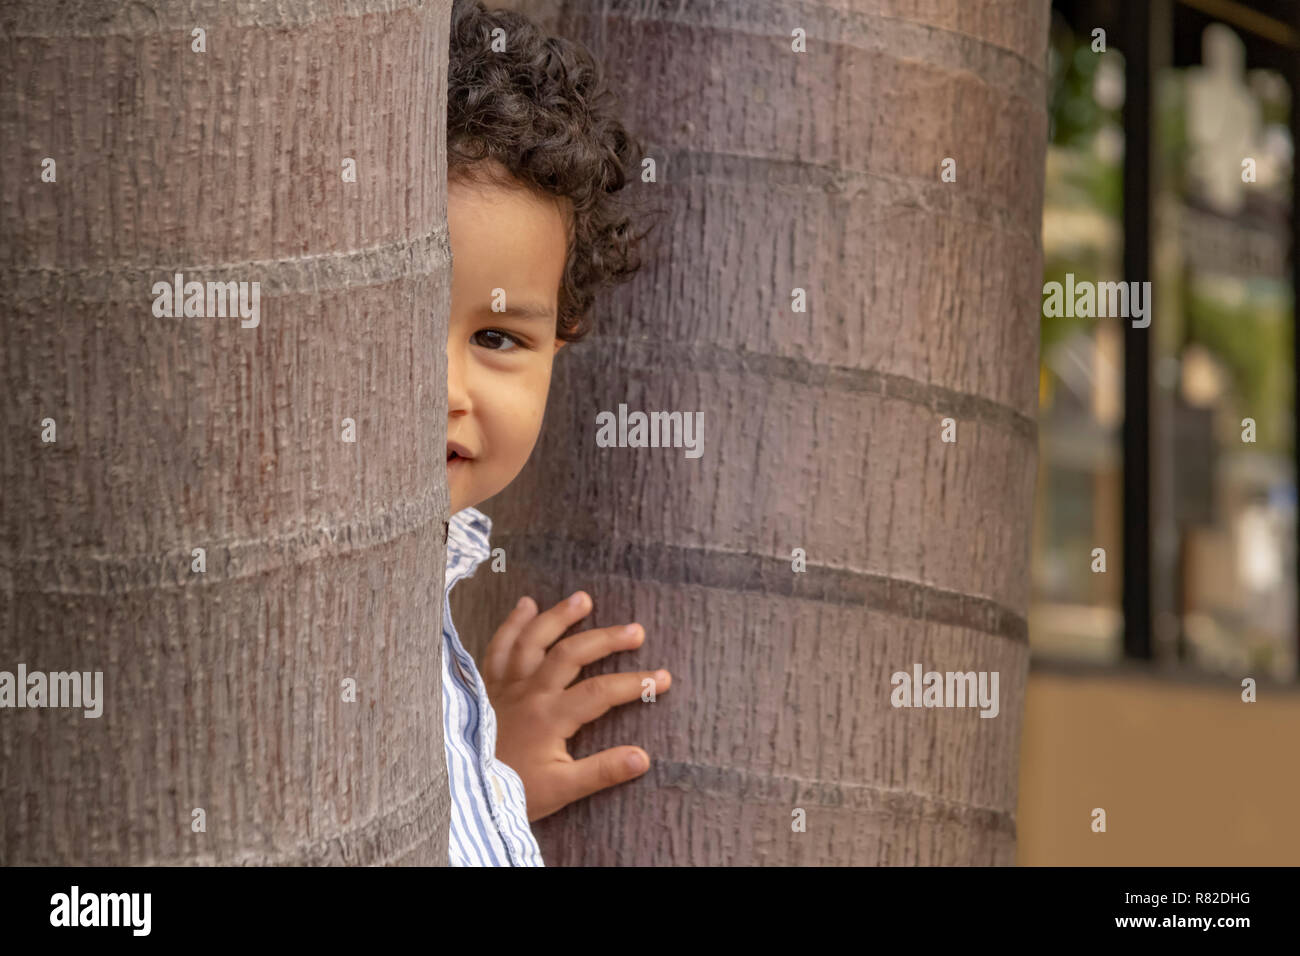 In between two trees on the street sidewalk, a little boy peeks at the camera. Showing one eye while hiding behind the tree with a pleasant smile. Stock Photo